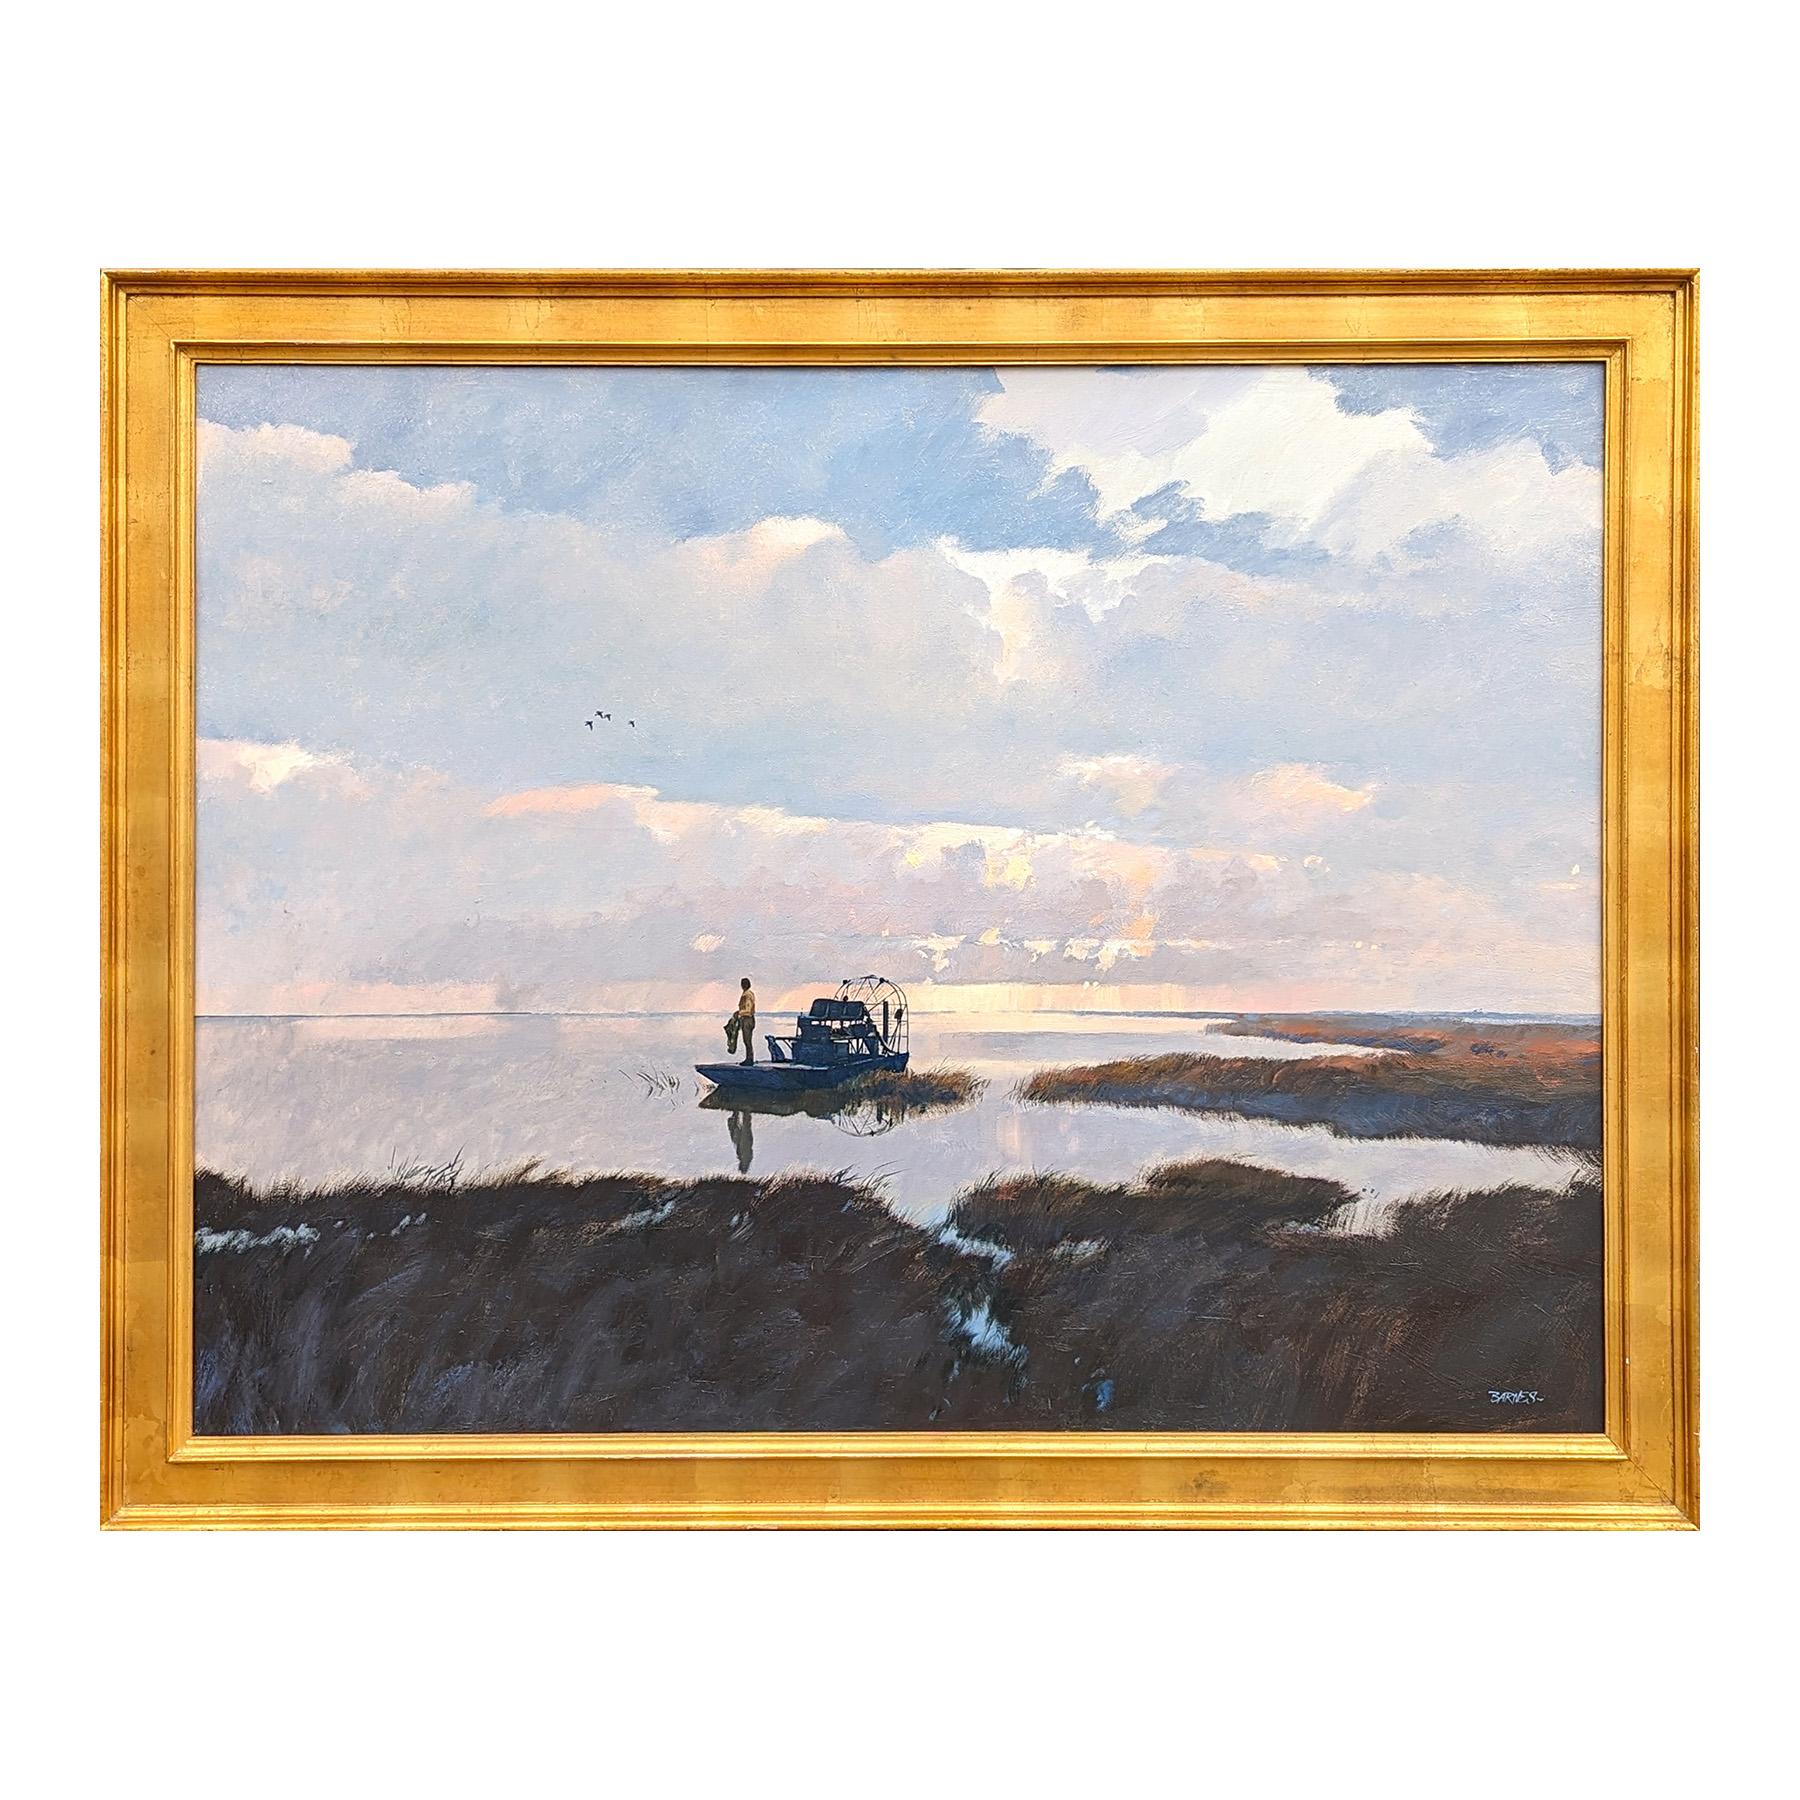 Naturalistic sporting landscape painting by Texas artist Al Barnes. The work features a central male figure on an airboat with his dog set against a quiet coastal Texas landscape. Signed in the front lower right corner. Currently hung in a gold leaf